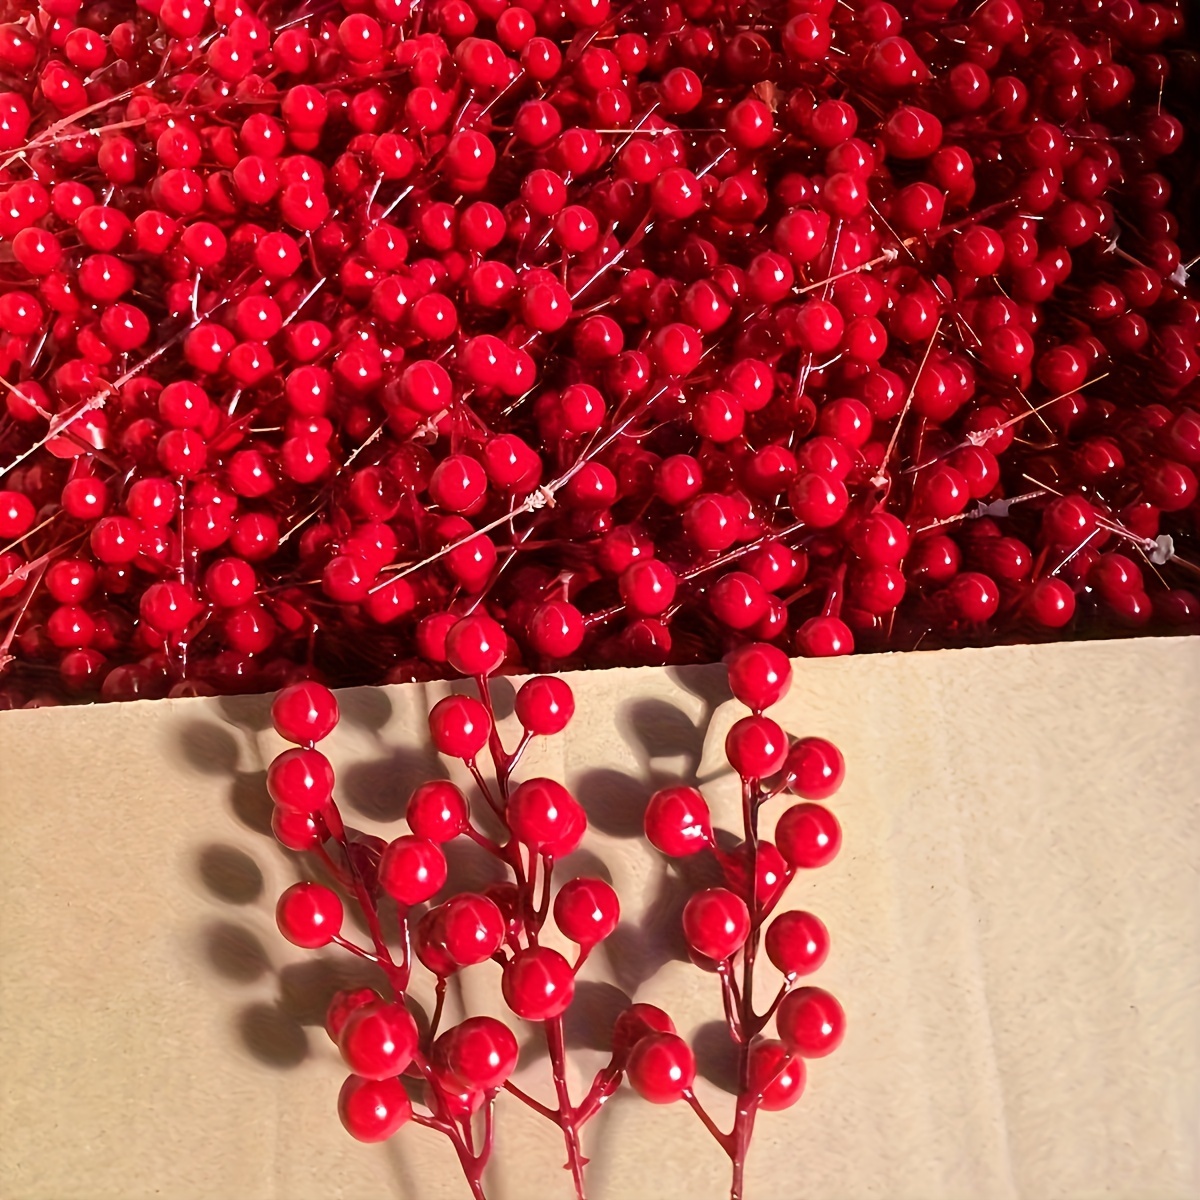 

12pcs, Artificial Red Berry Stems, Add A Touch Of Joy To Your Home Decor, For Flower Decoration, Holiday Celebration, Crafts, Wedding, Holiday Home Decor, Bouquet Diy Accessories